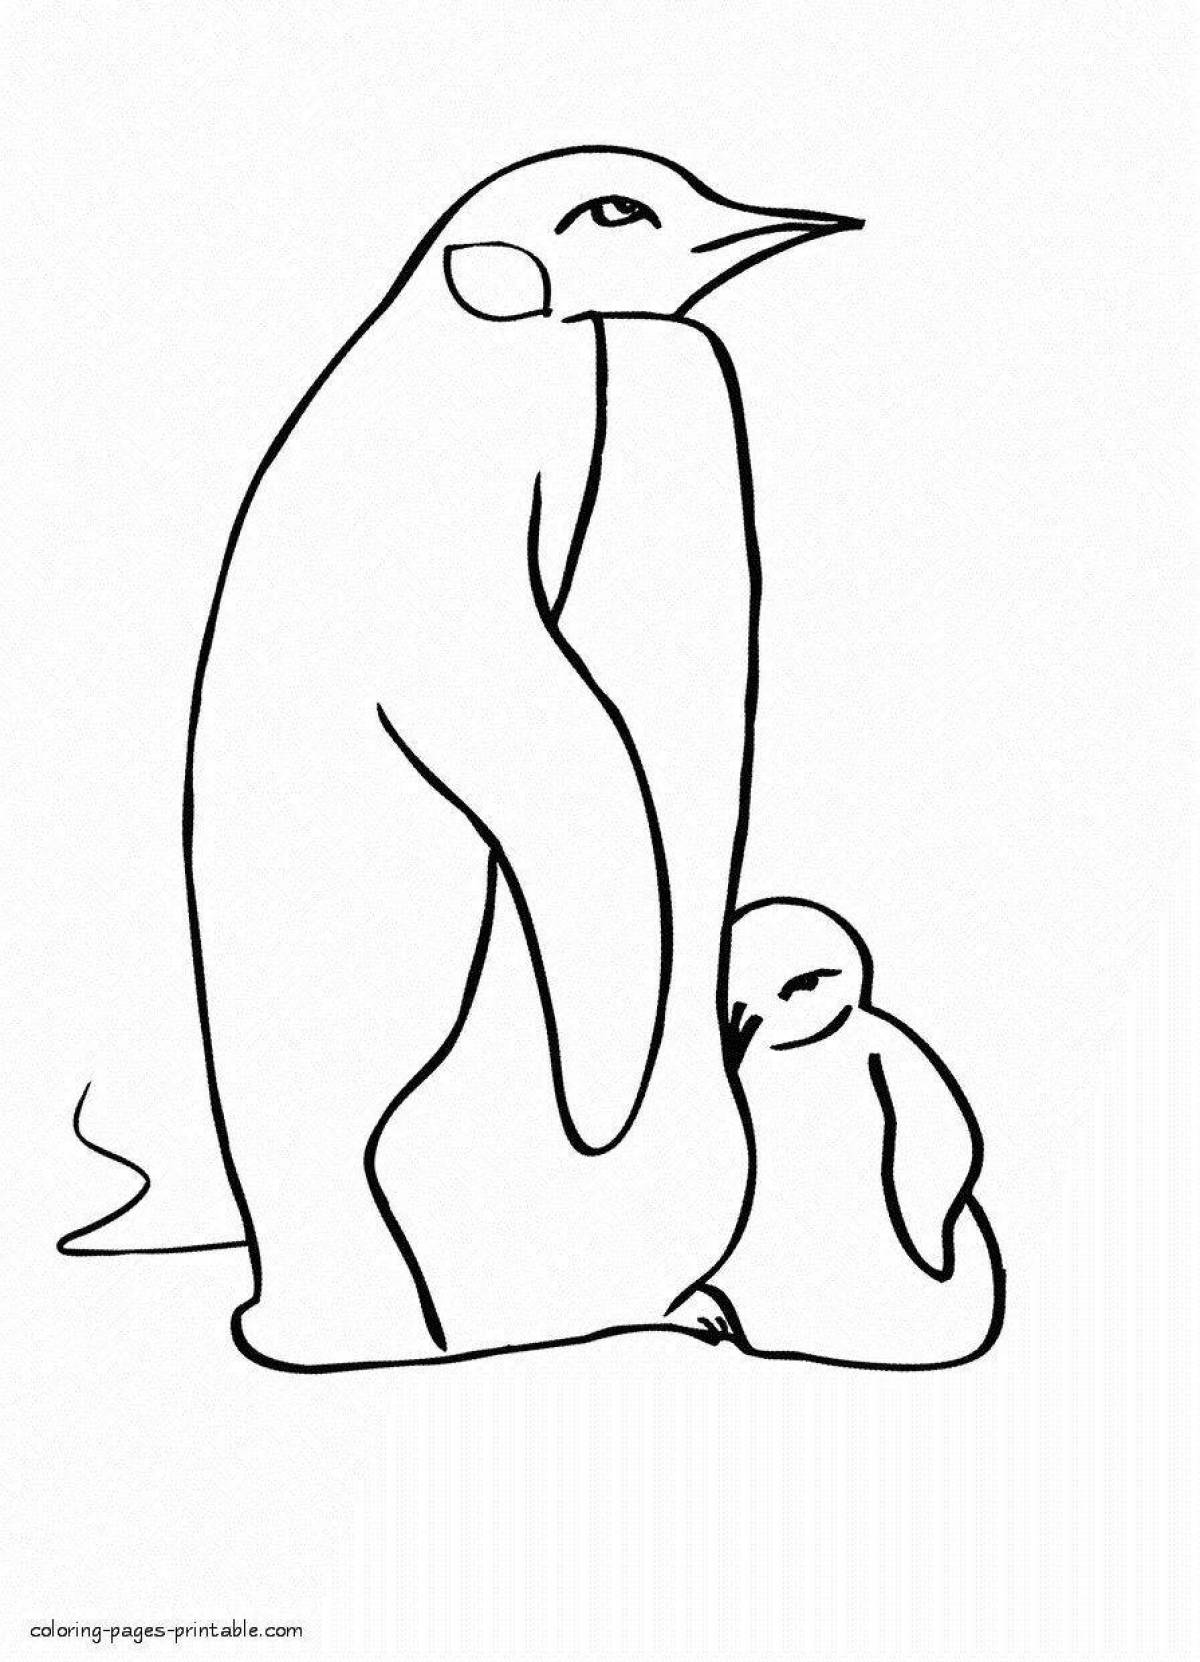 Coloring book shining penguin on an ice floe for children